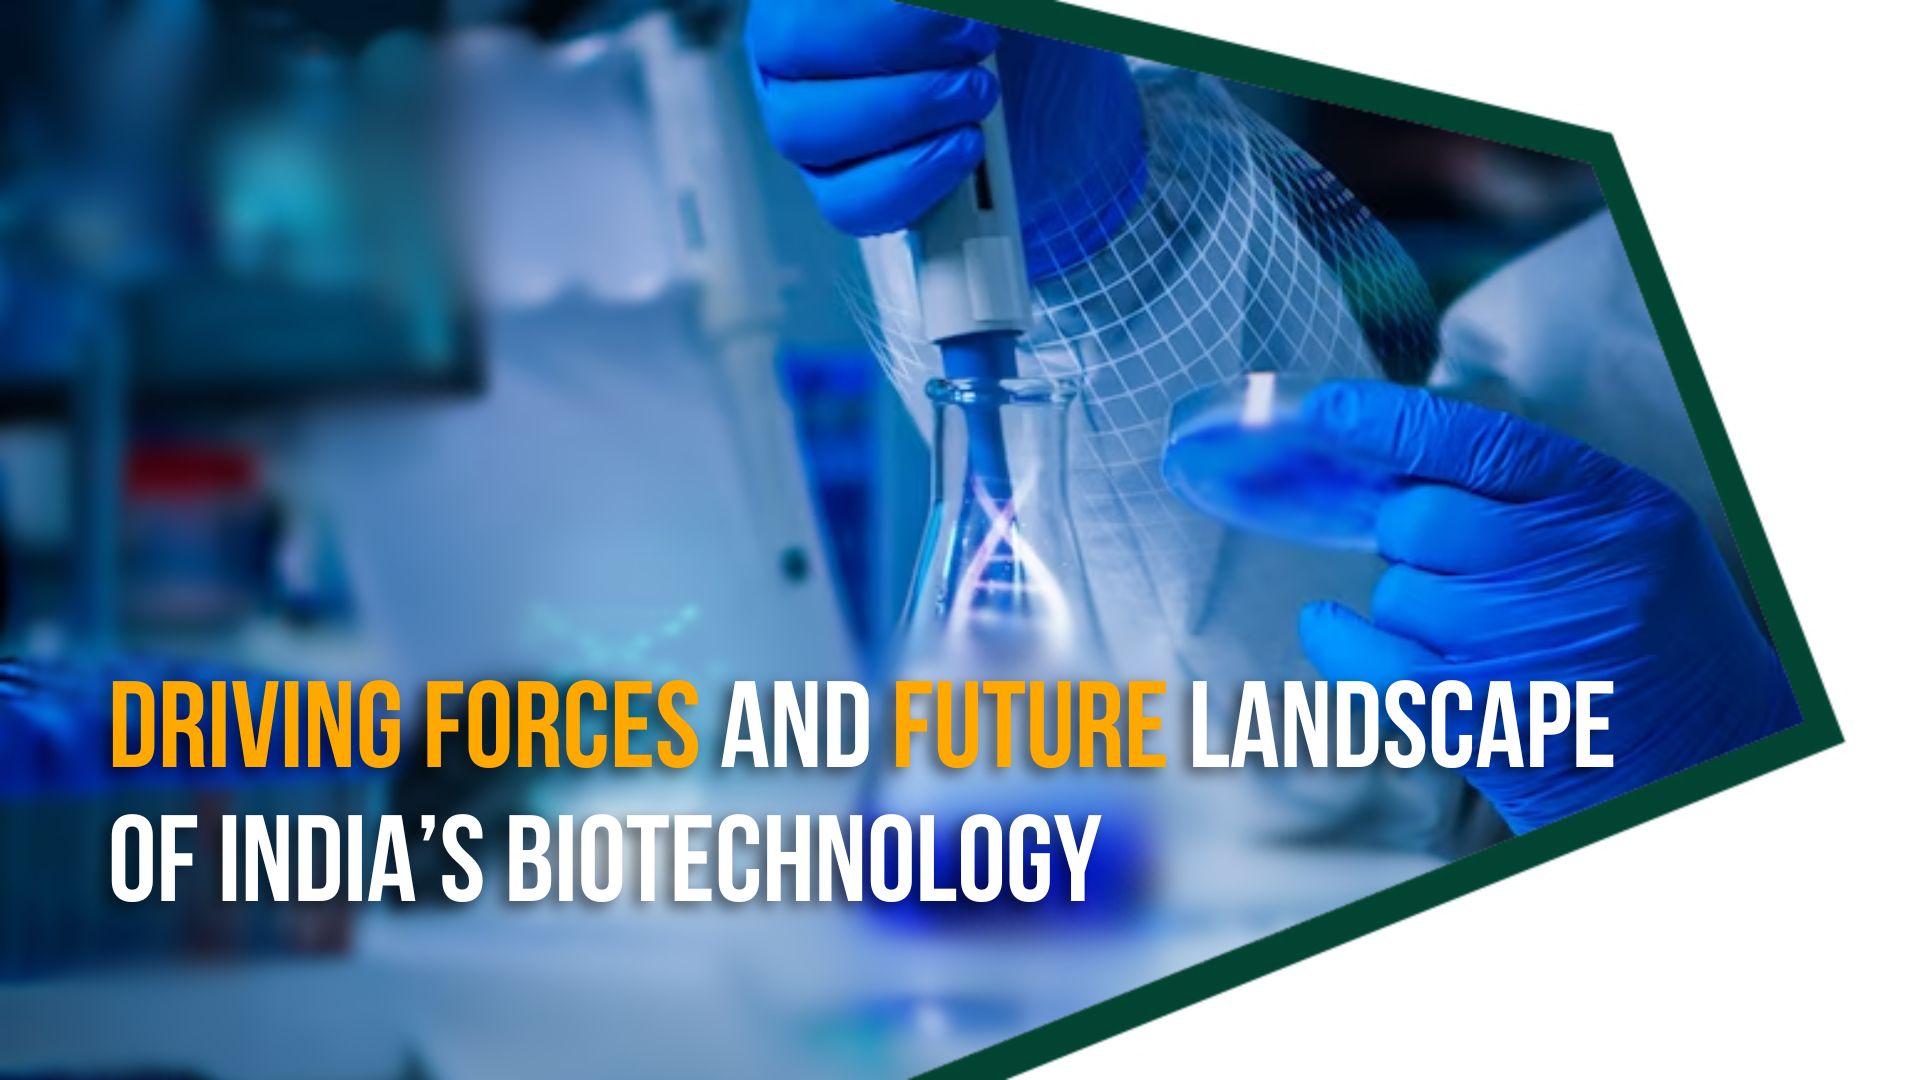 Driving Forces and Future Landscape of India’s Biotechnology